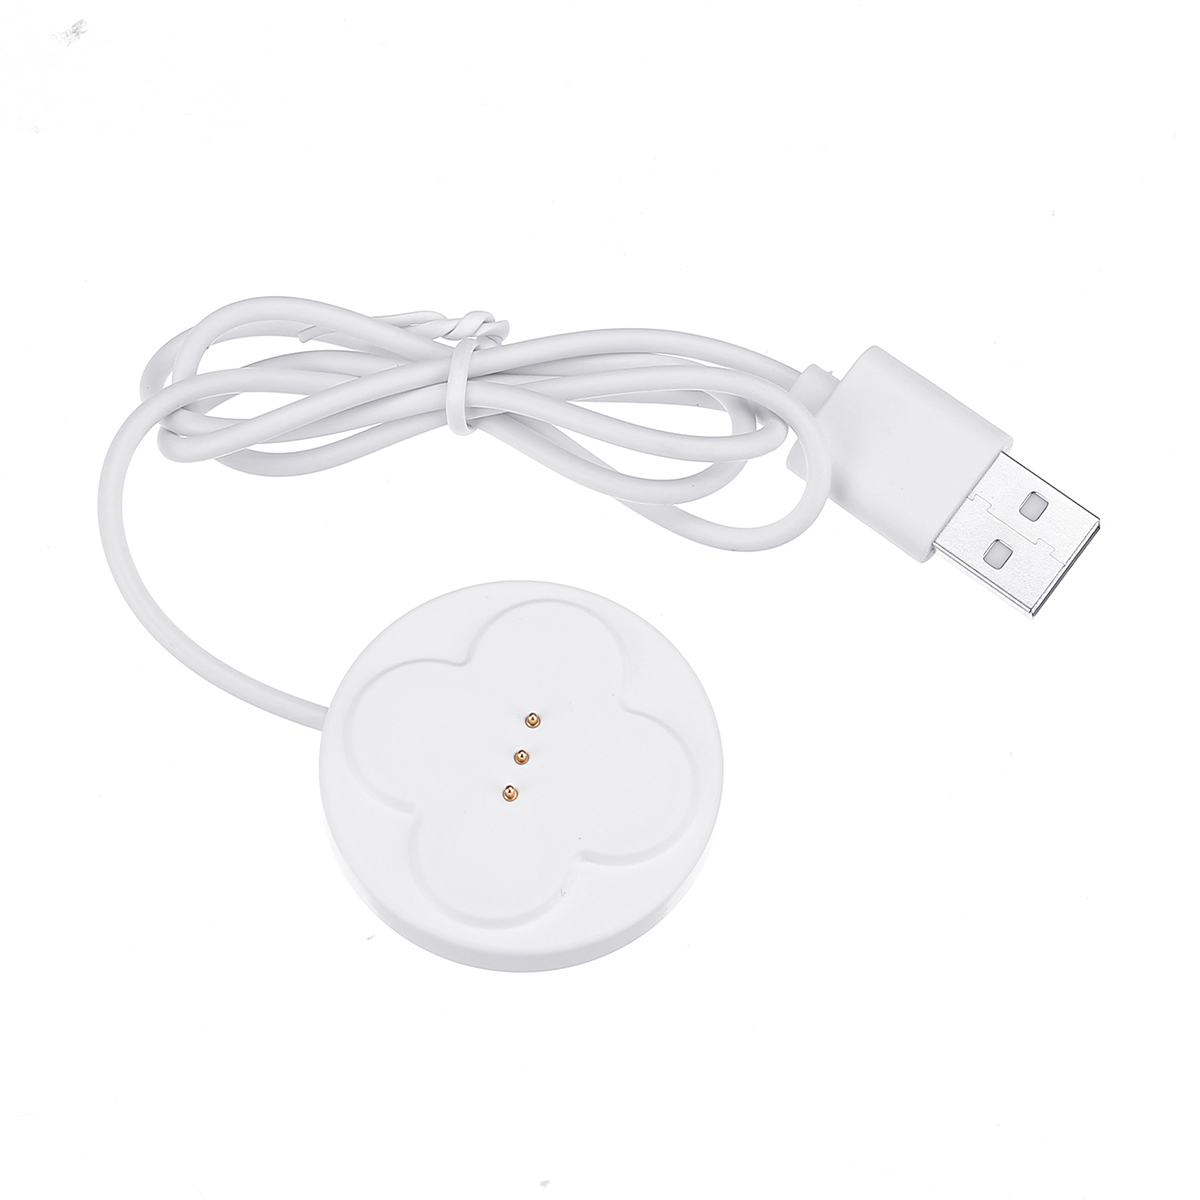 Find DC5V USB DIY Smart Puzzle Night Light Touch sensitive Color changing Toy White / Yellow for Sale on Gipsybee.com with cryptocurrencies